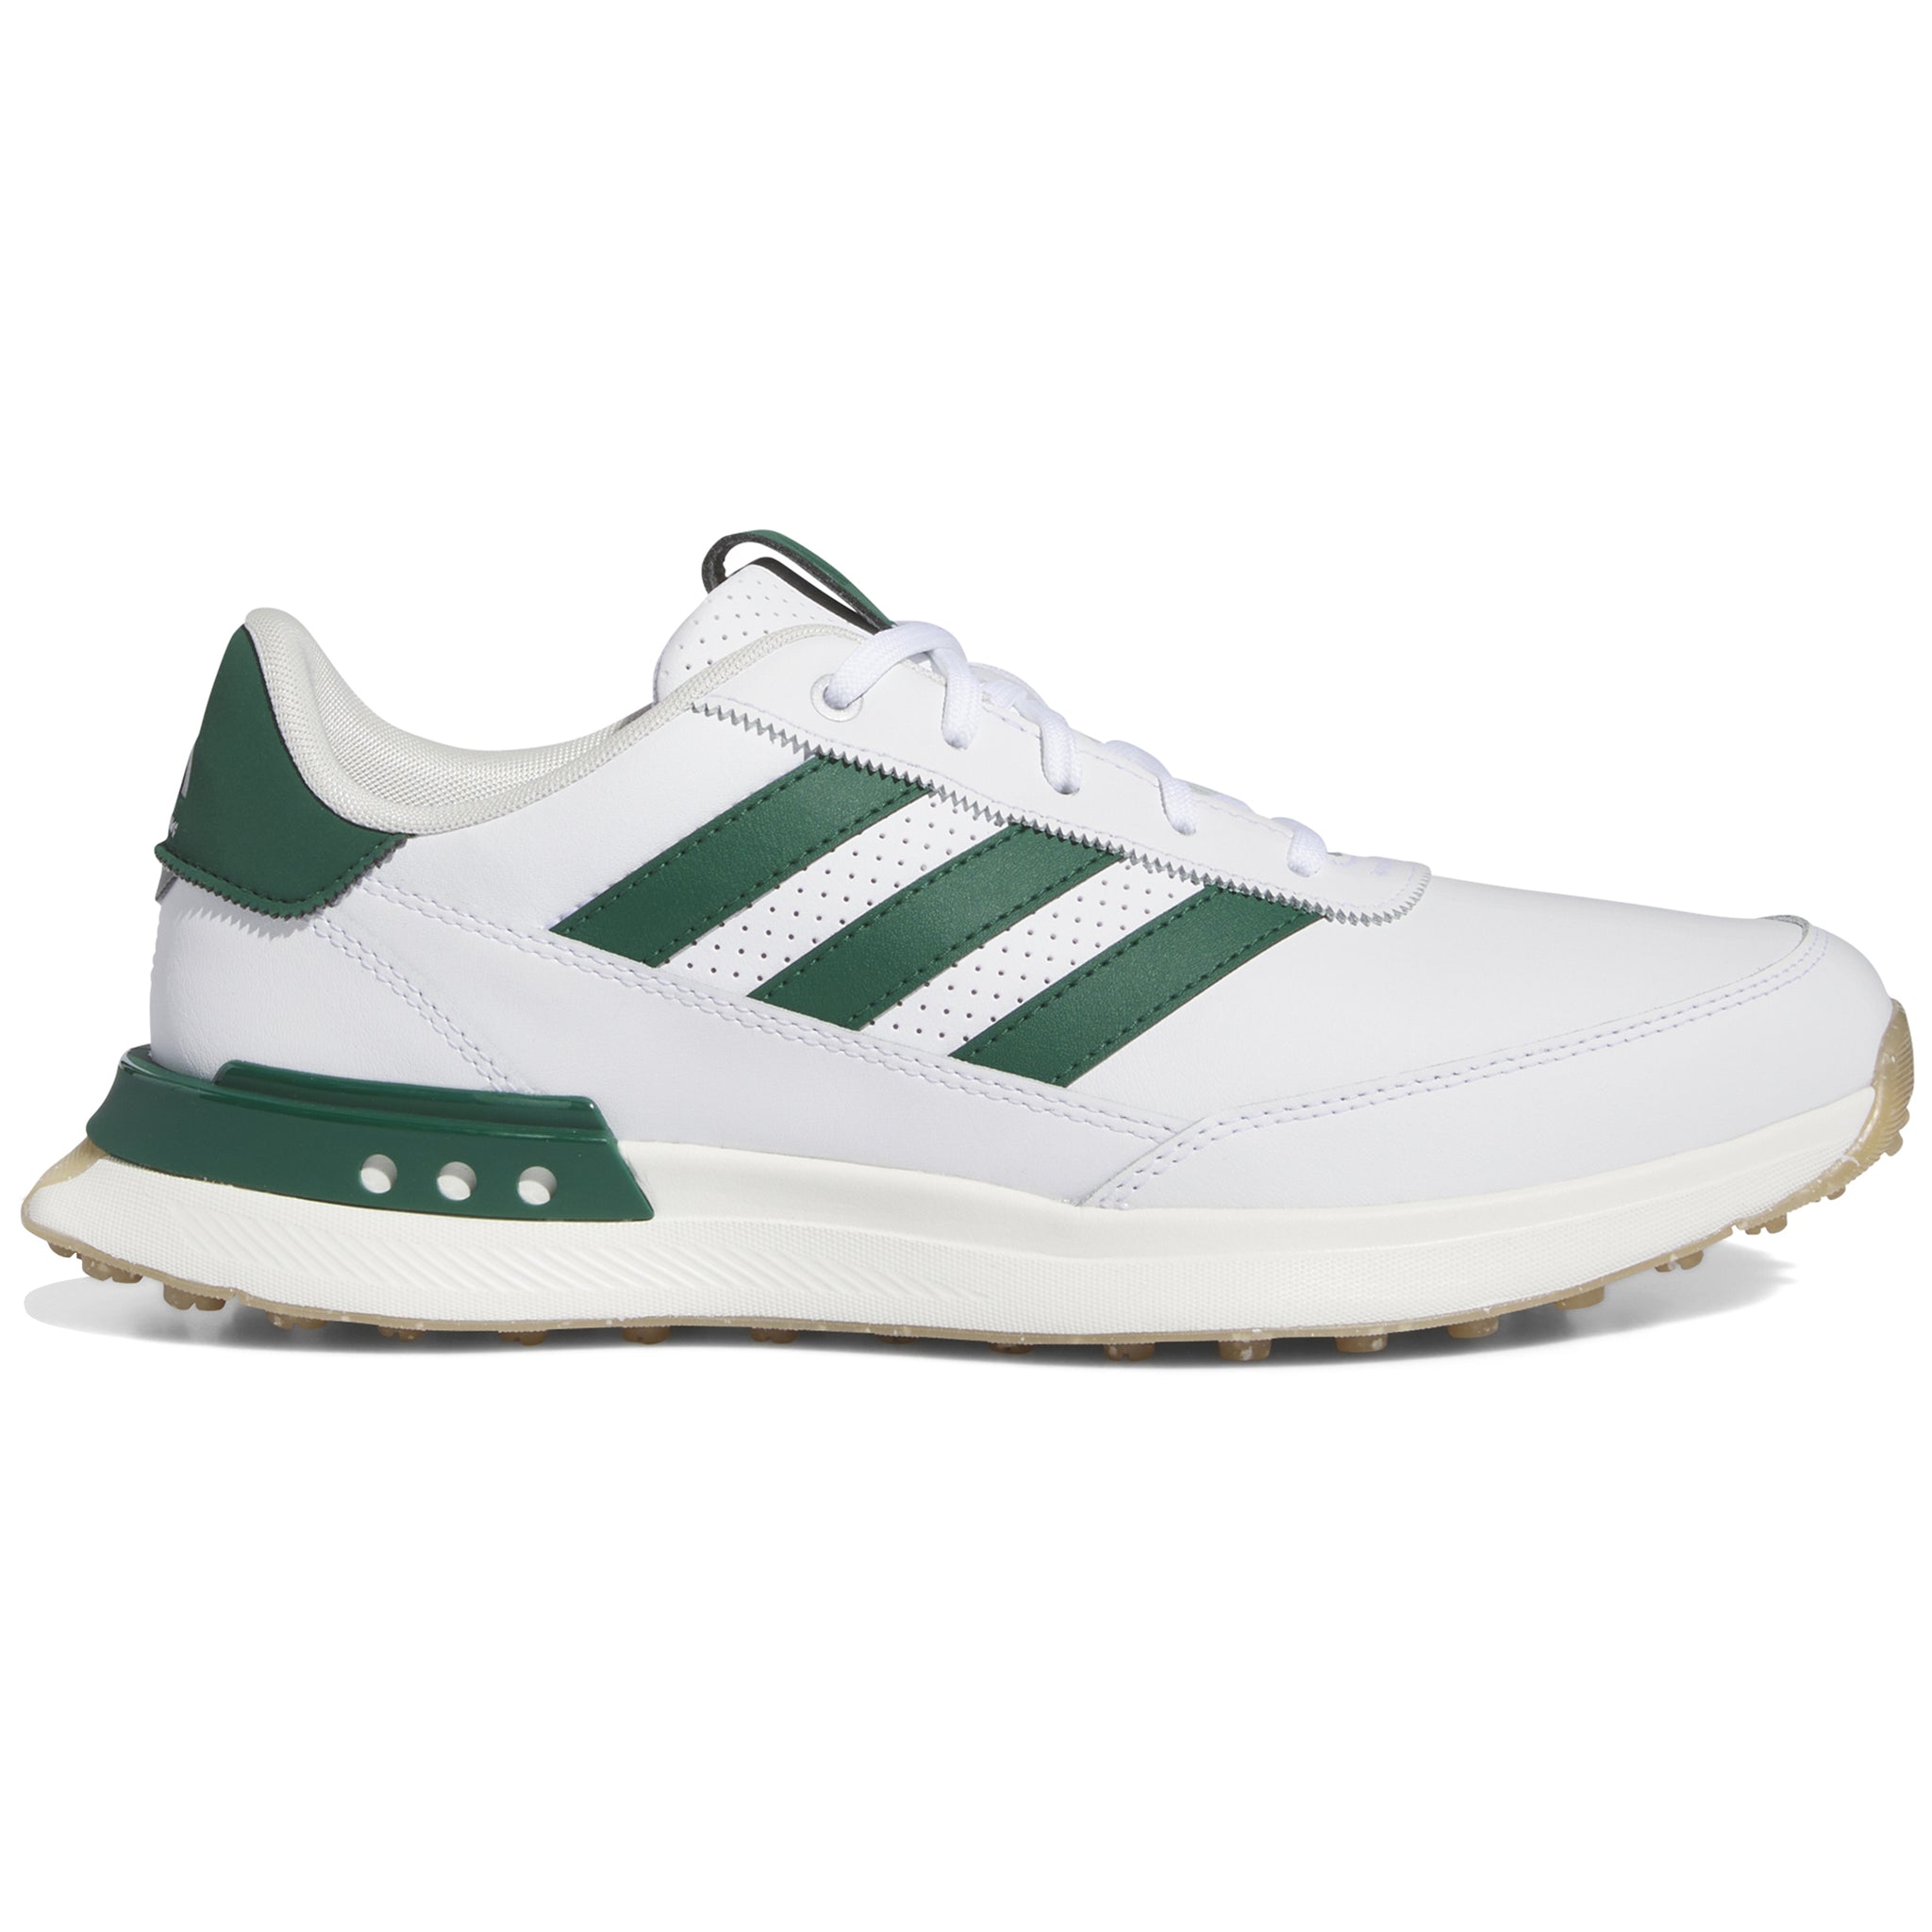 adidas-s2g-sl-leather-24-golf-shoes-if0299-white-collegiate-green-gum-4